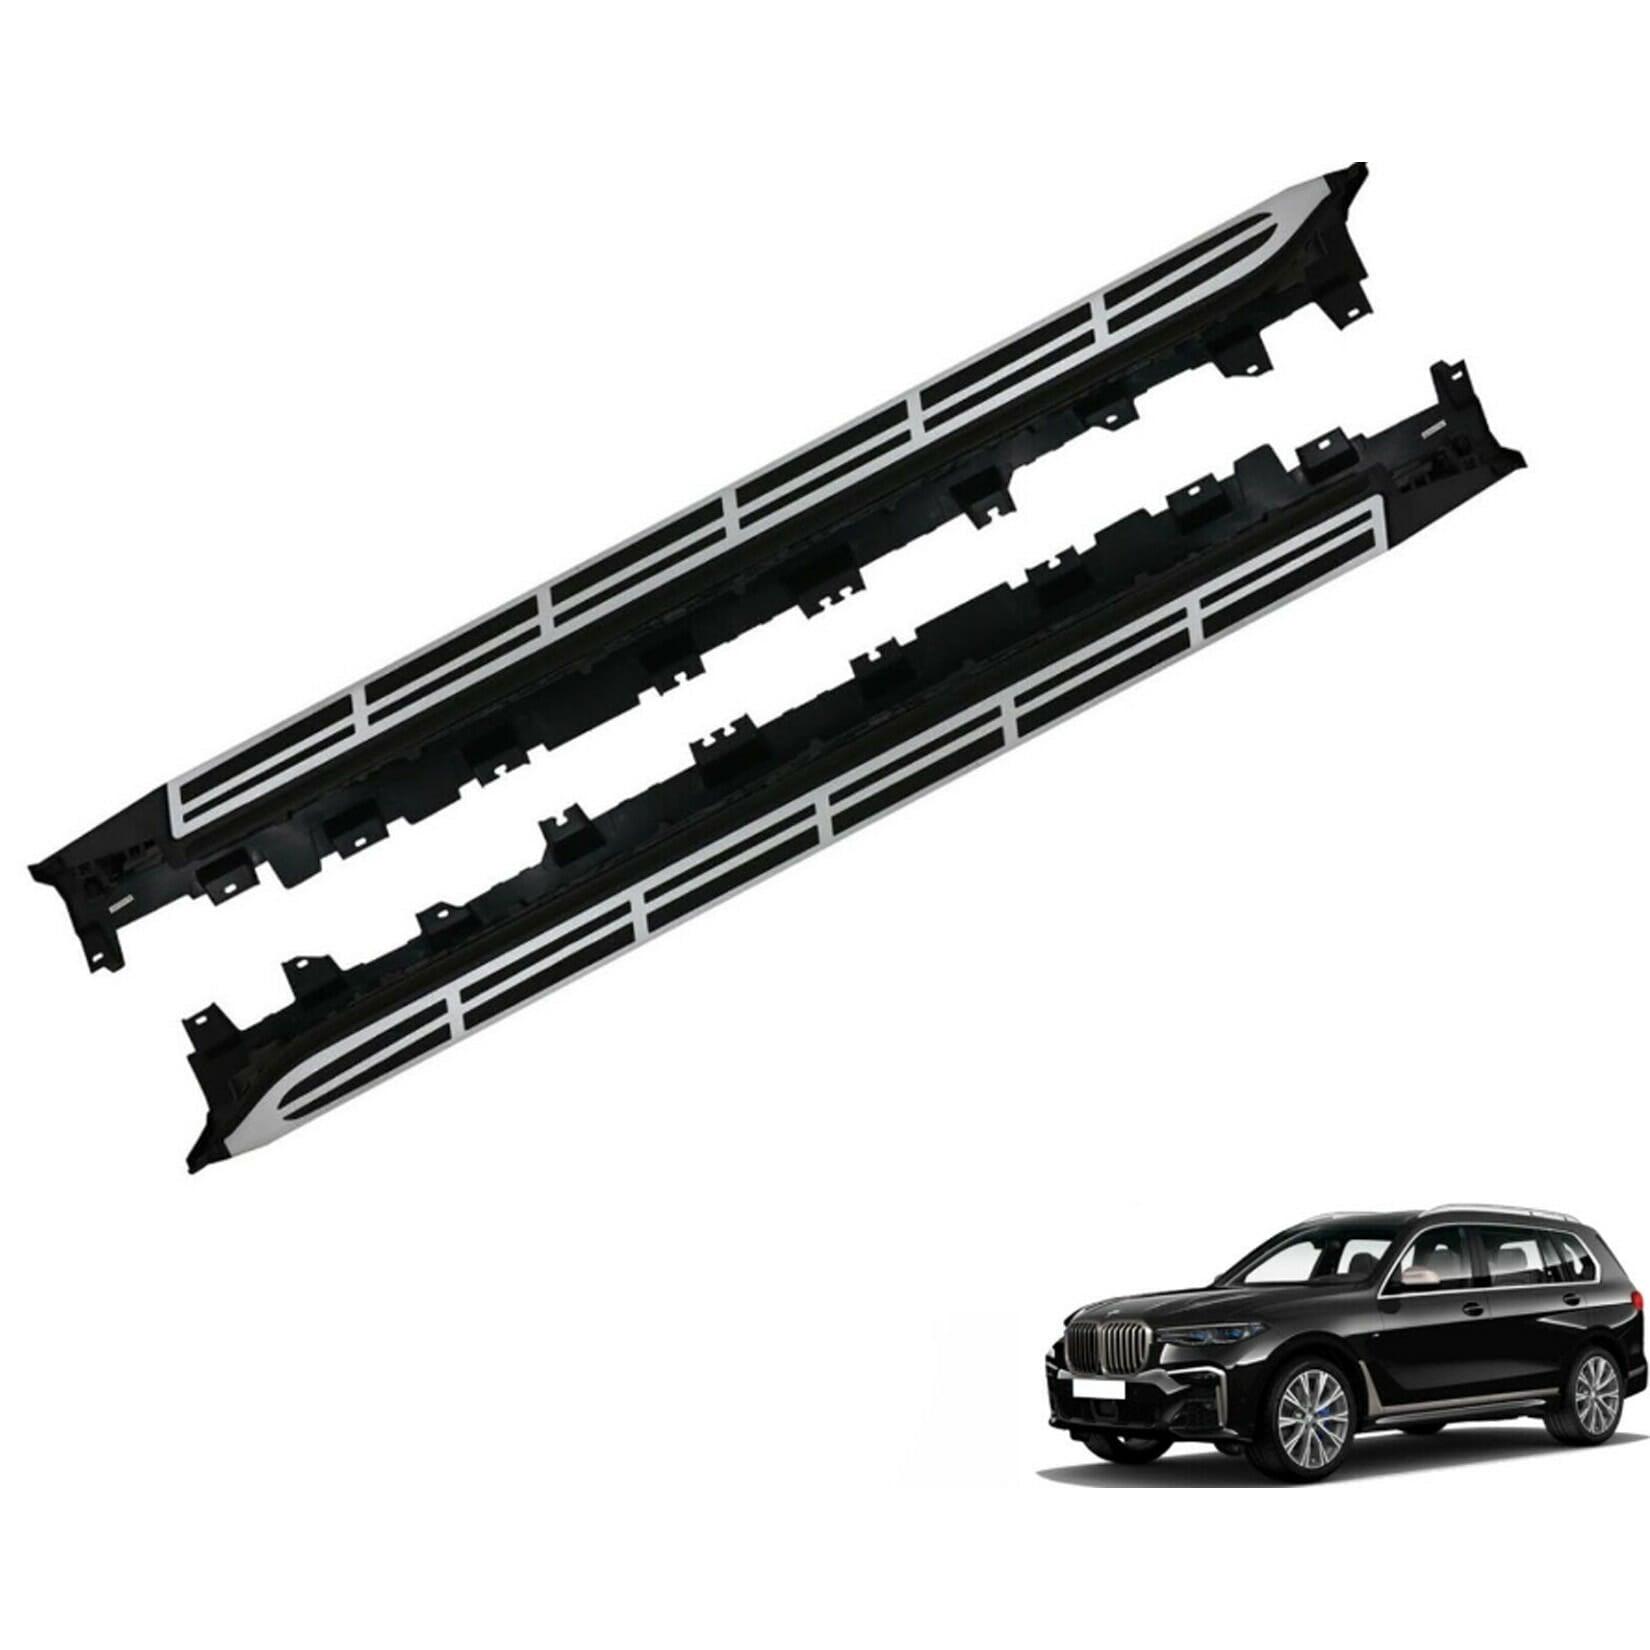 BMW X7 G07 2018 ON OEM STYLE RUNNING BOARDS - SIDE STEP - PAIR - Storm Xccessories2